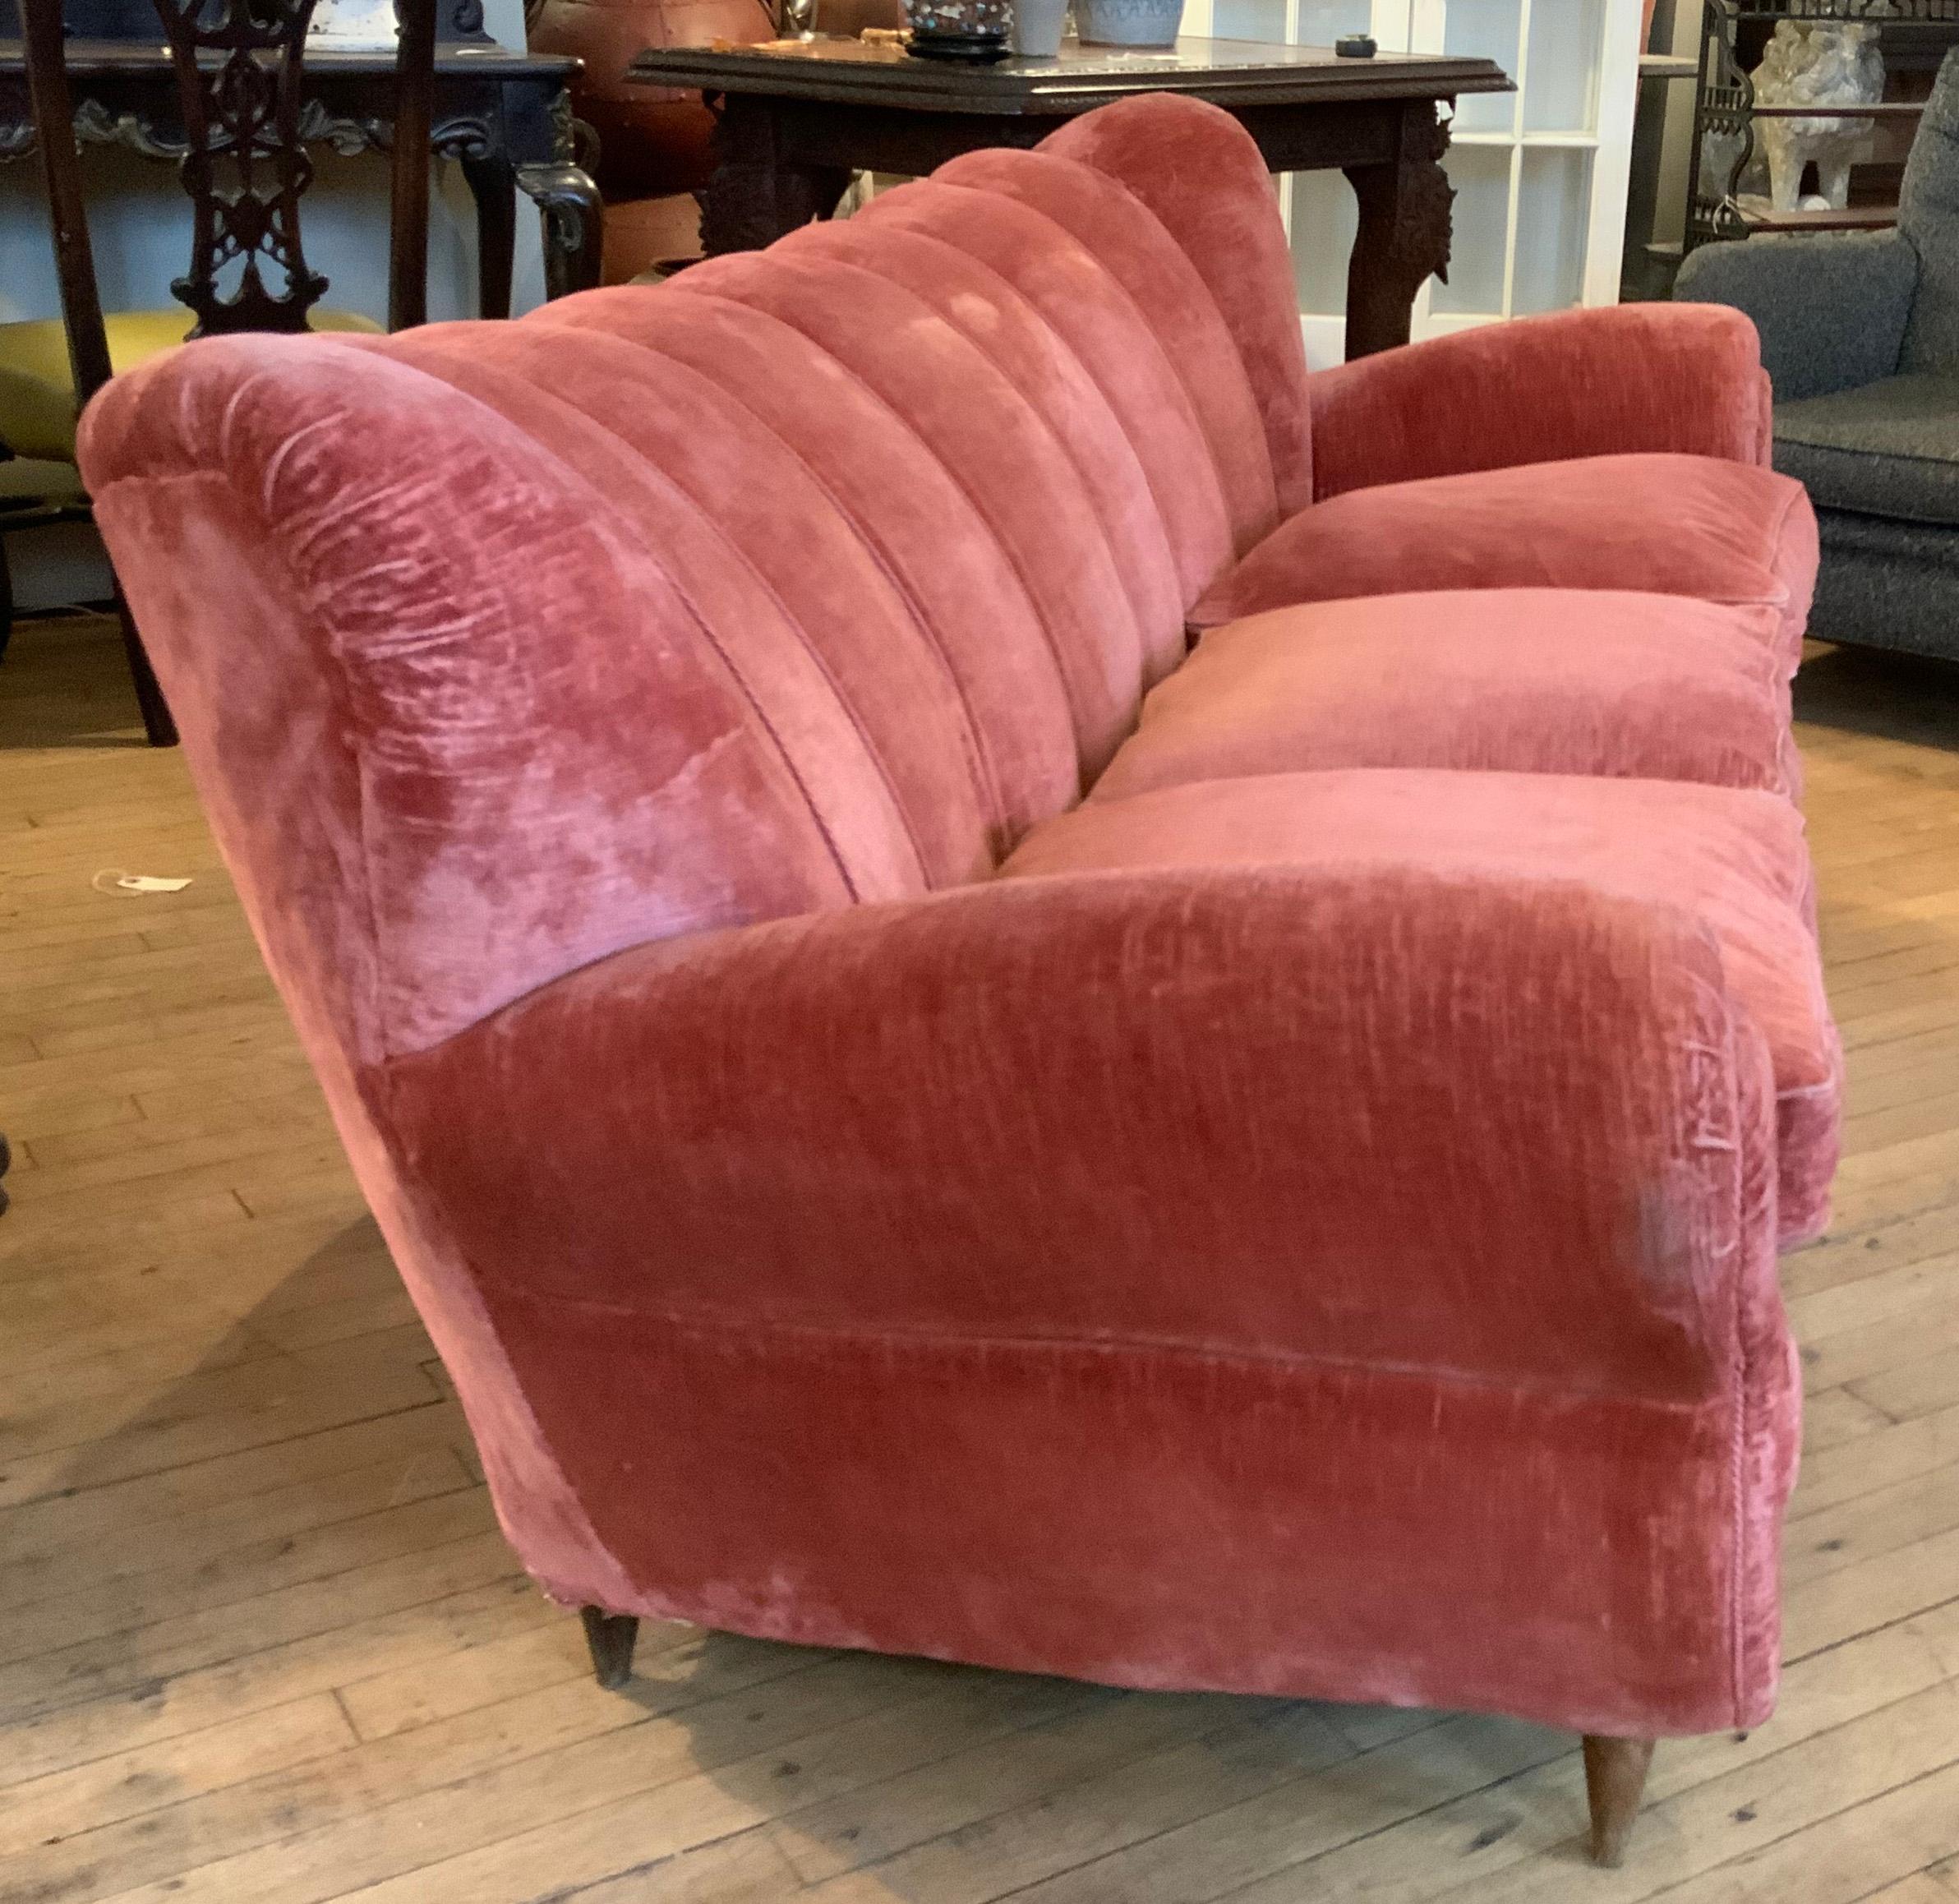 A truly incredible 1940's Italian upholstered sofa, with large scrolled arms, and channel upholstered back. wonderful design and scale, in it's original pink/salmon colored velvet fabric, which shows age expected wear. the sofa is raised on tapered